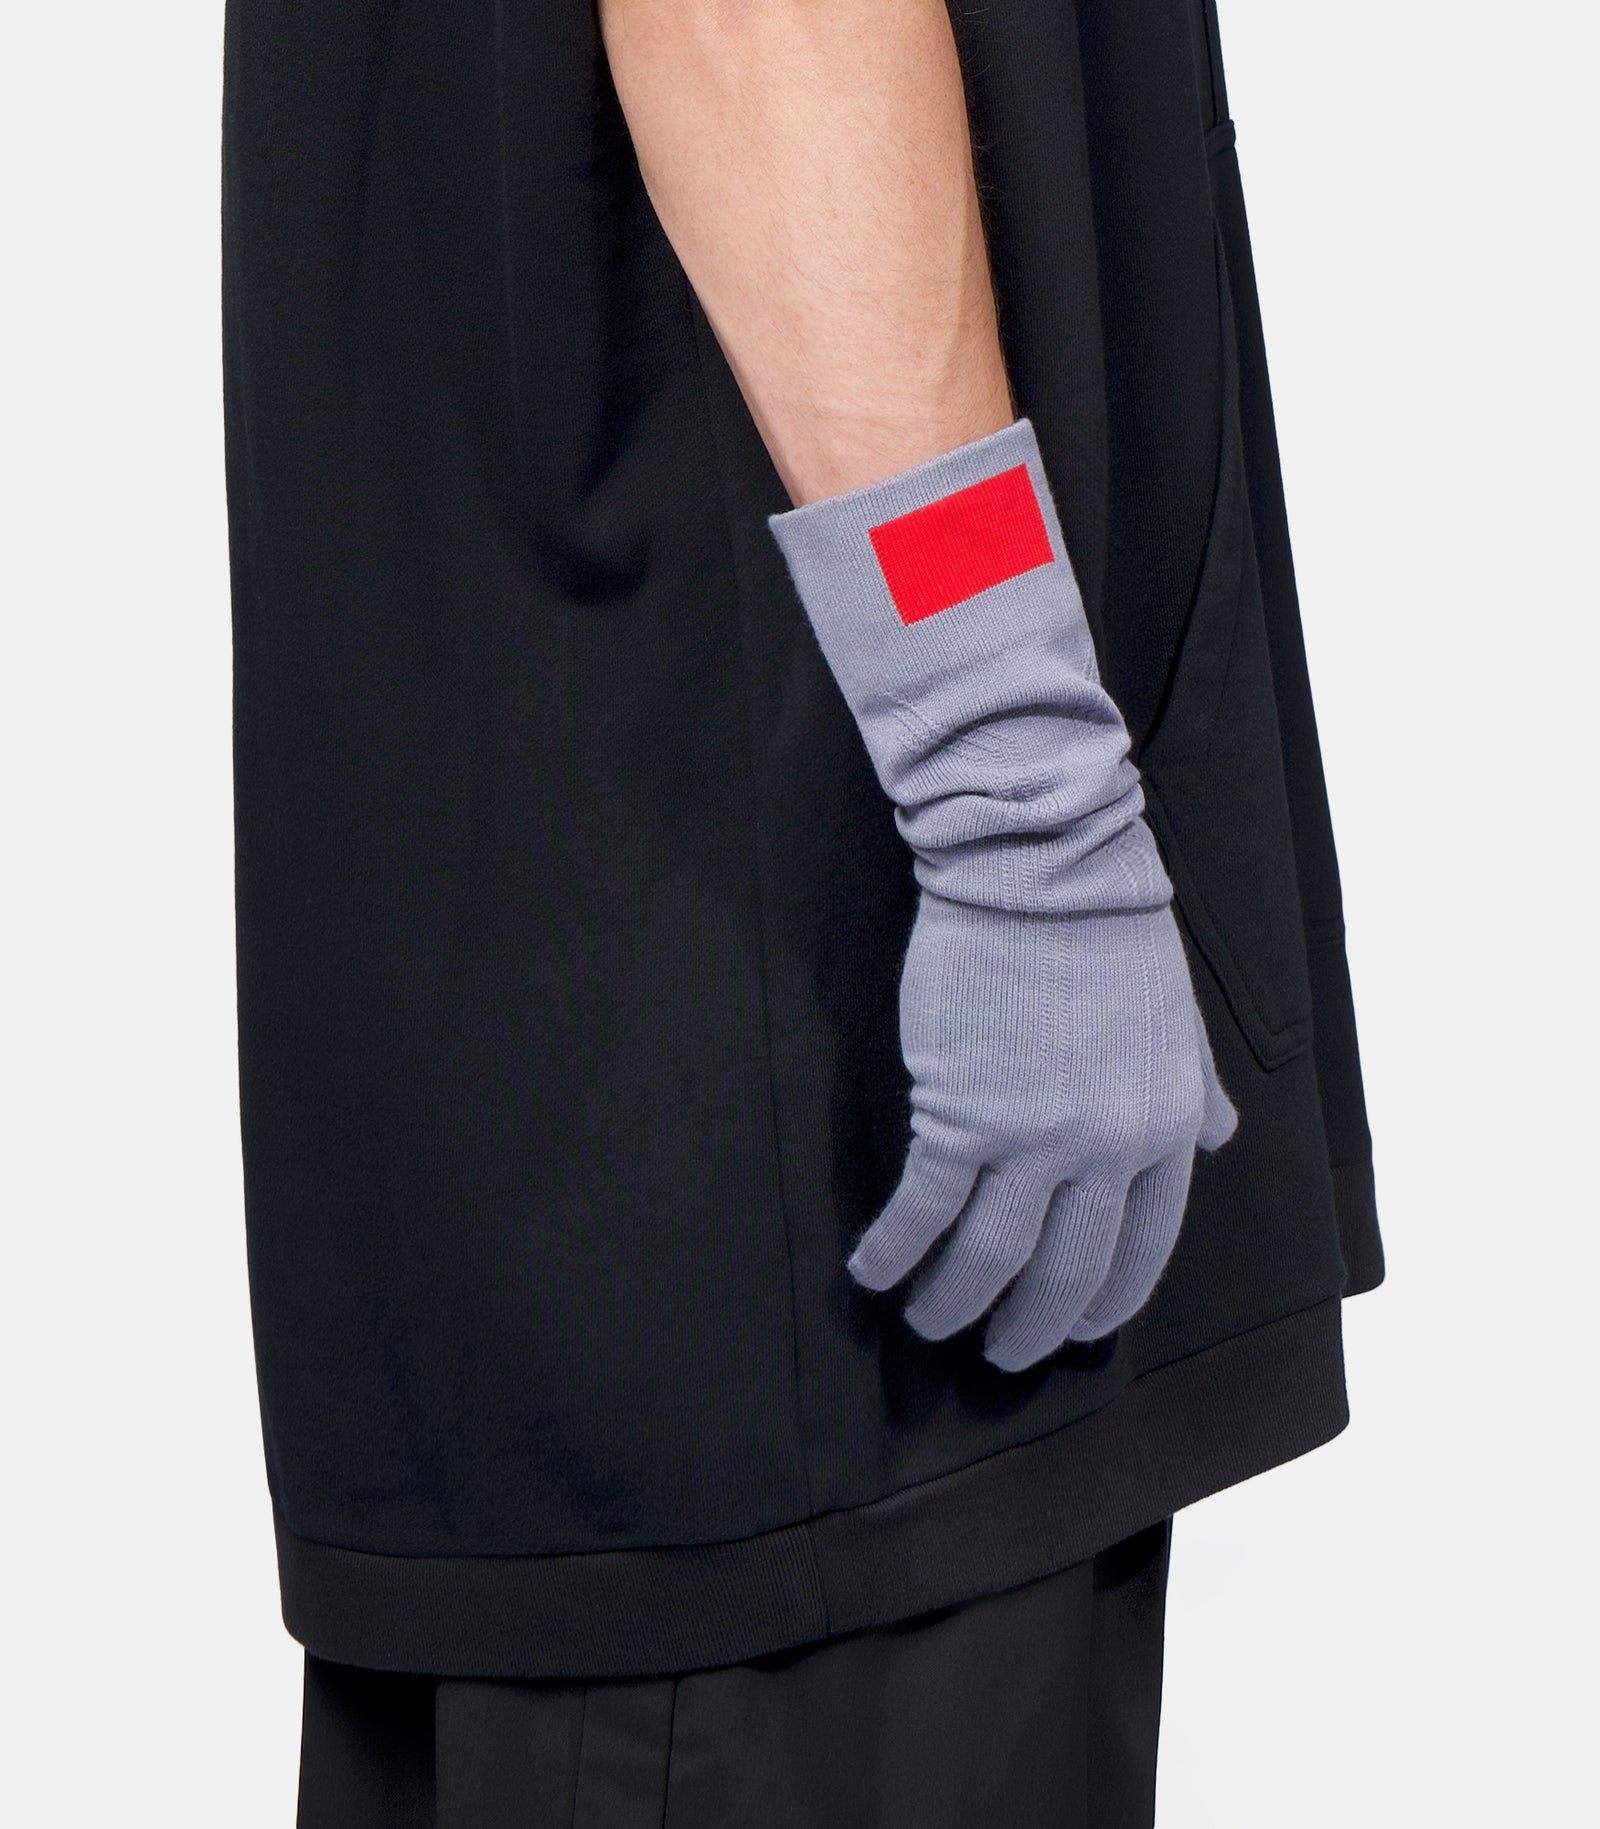 Persona Knit Gloves